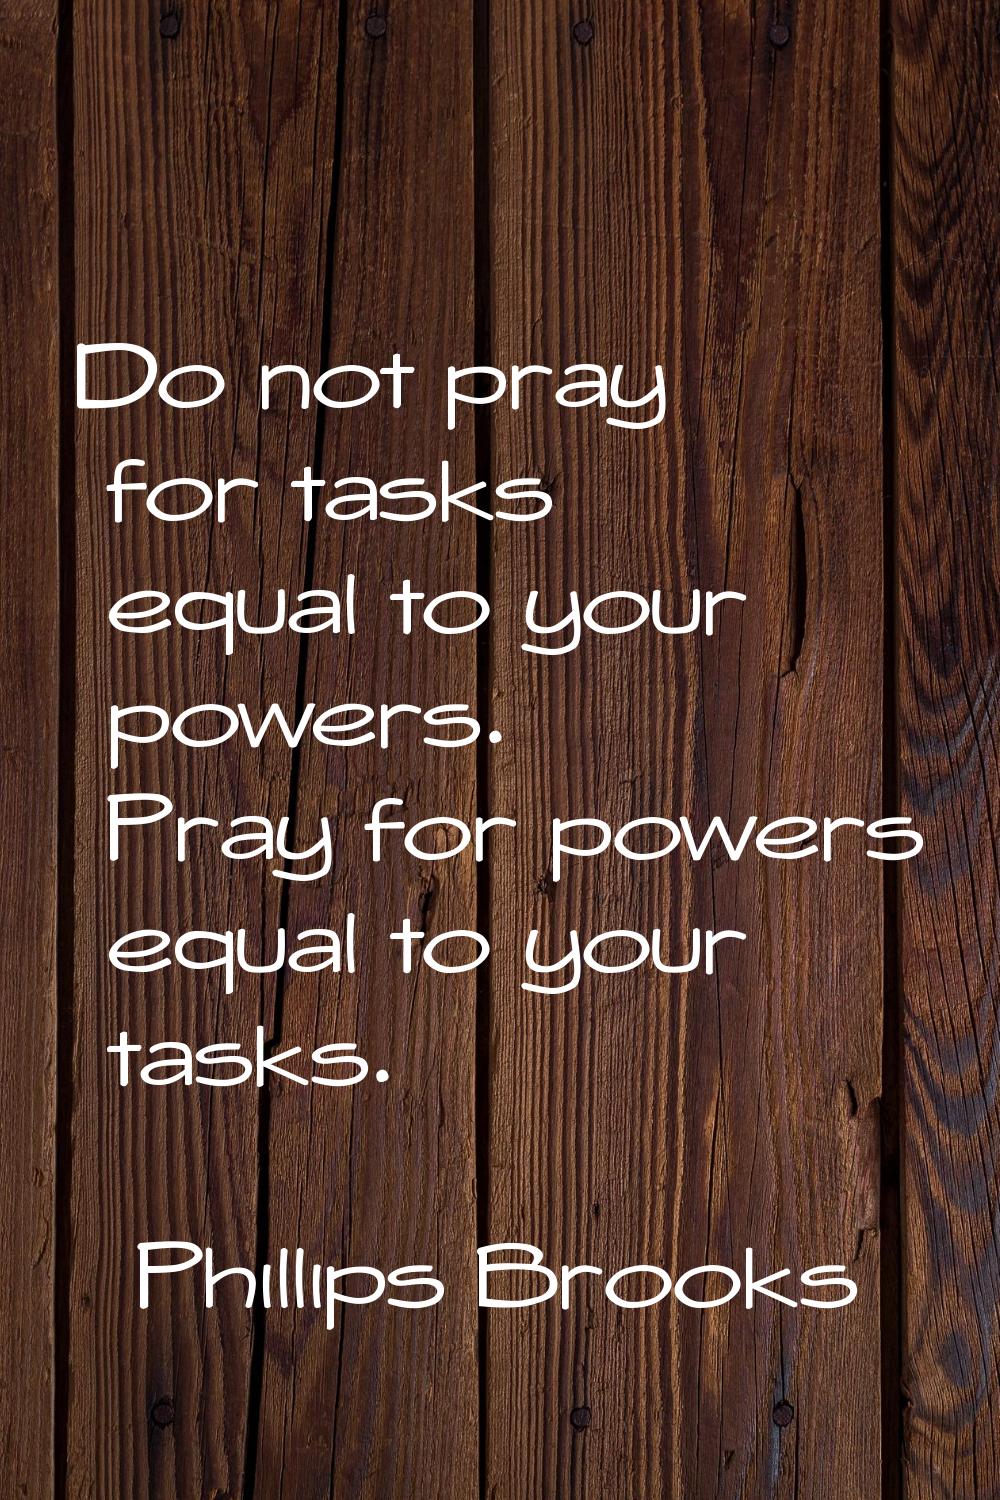 Do not pray for tasks equal to your powers. Pray for powers equal to your tasks.